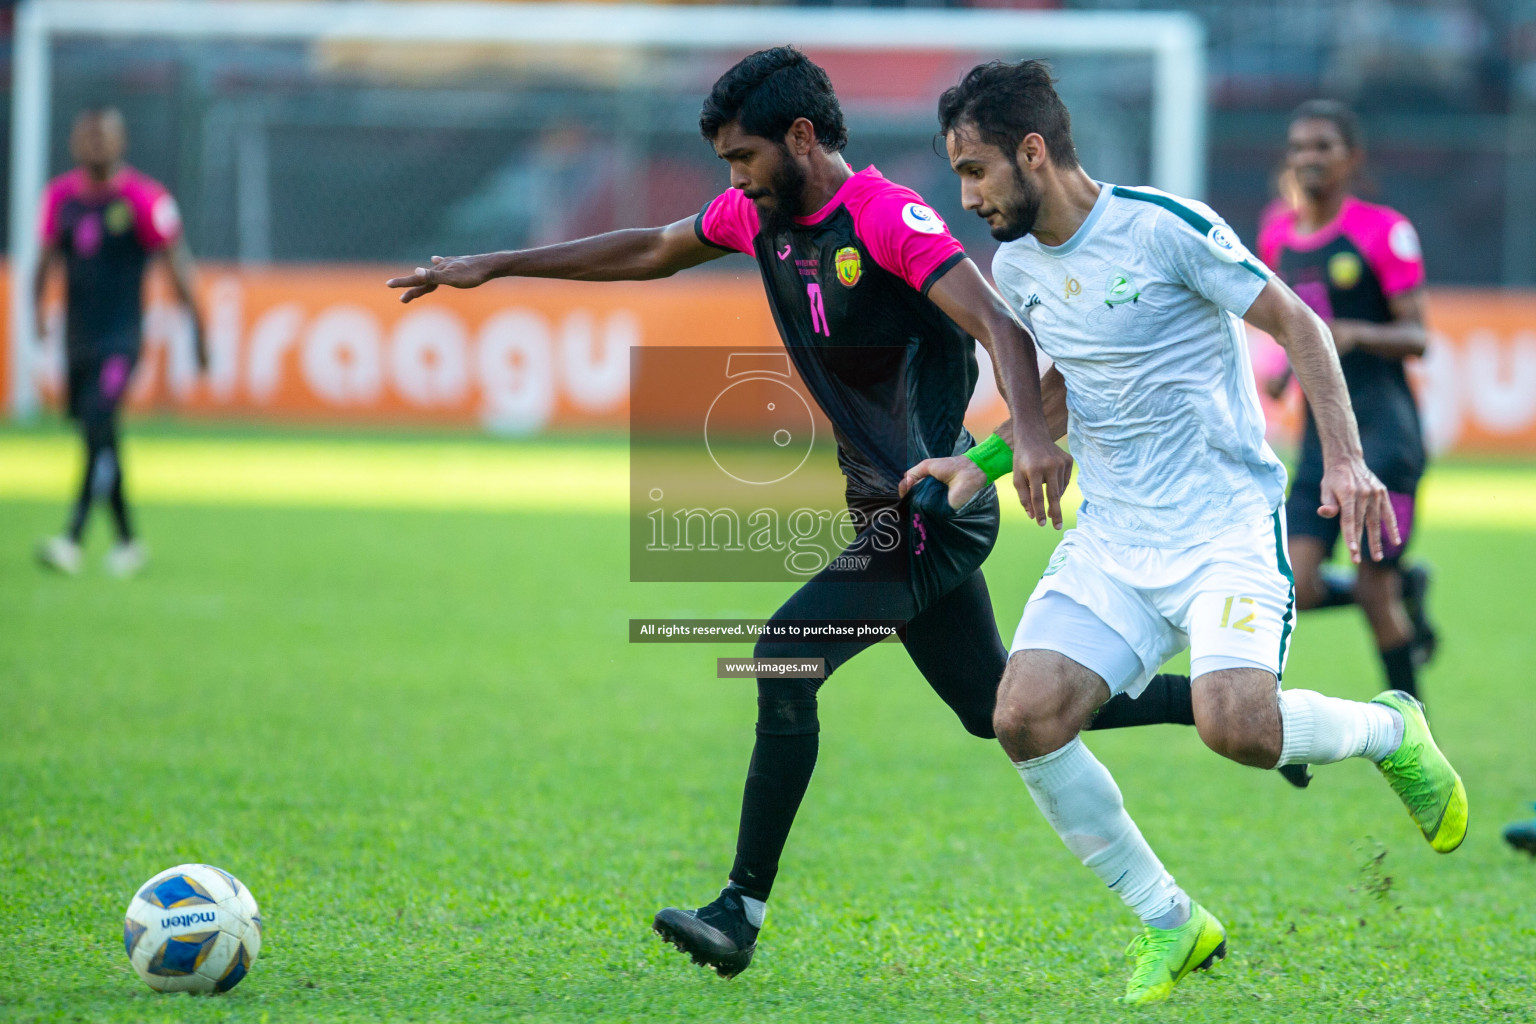 Green Streets vs United Victory in Dhiraagu Dhivehi Premier League 2020-21 on 26 December 2020 held in Male', Maldives